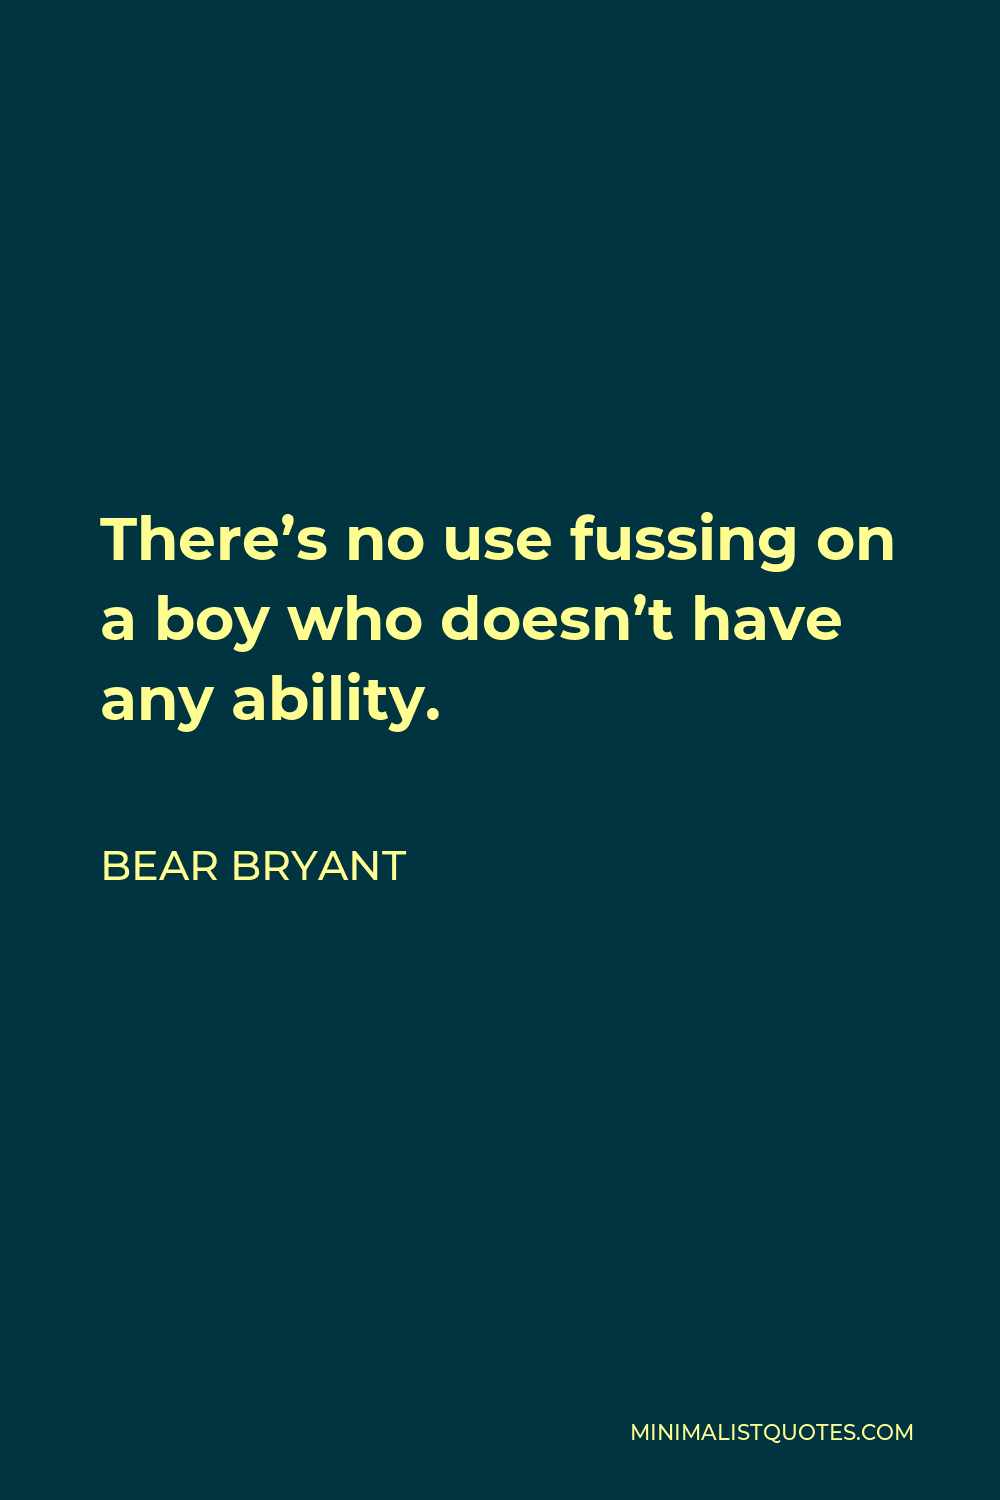 Bear Bryant Quote - There’s no use fussing on a boy who doesn’t have any ability.